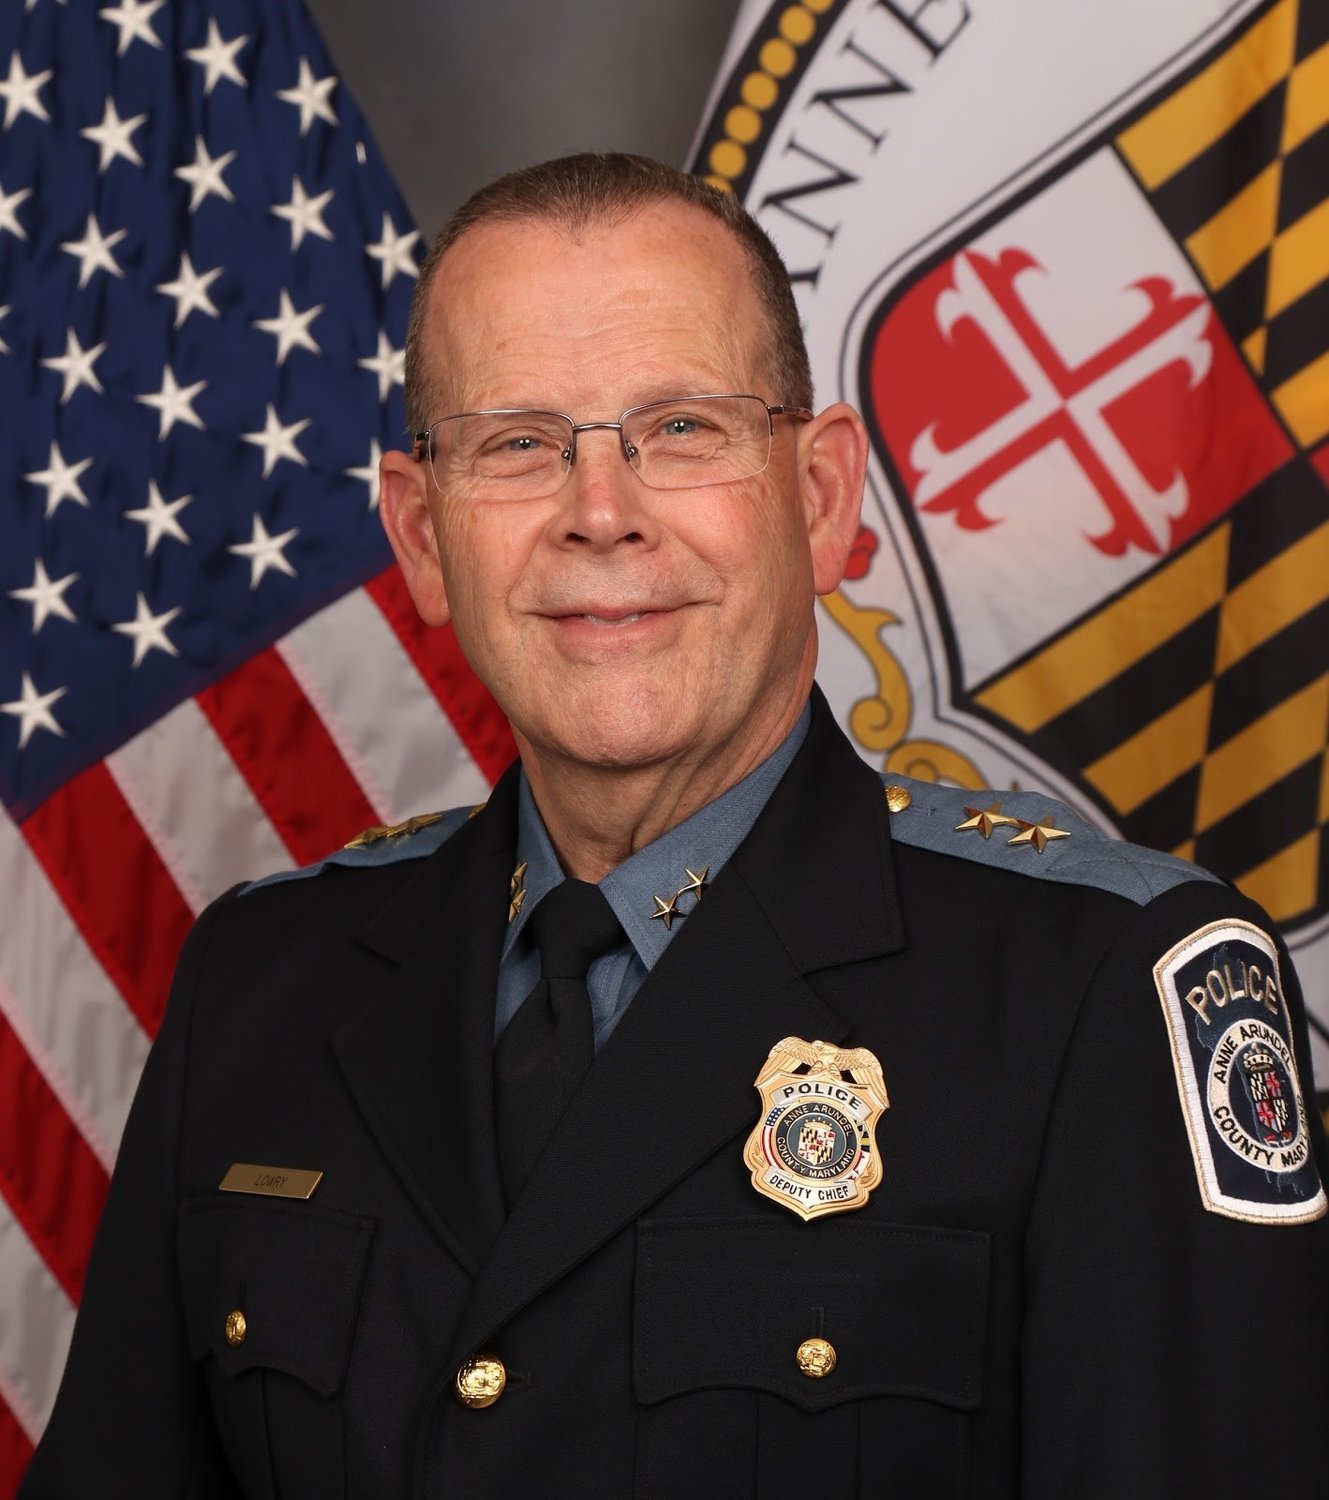 Since 2019, William Lowry has served as deputy chief of police under Police Chief Tim Altomare.